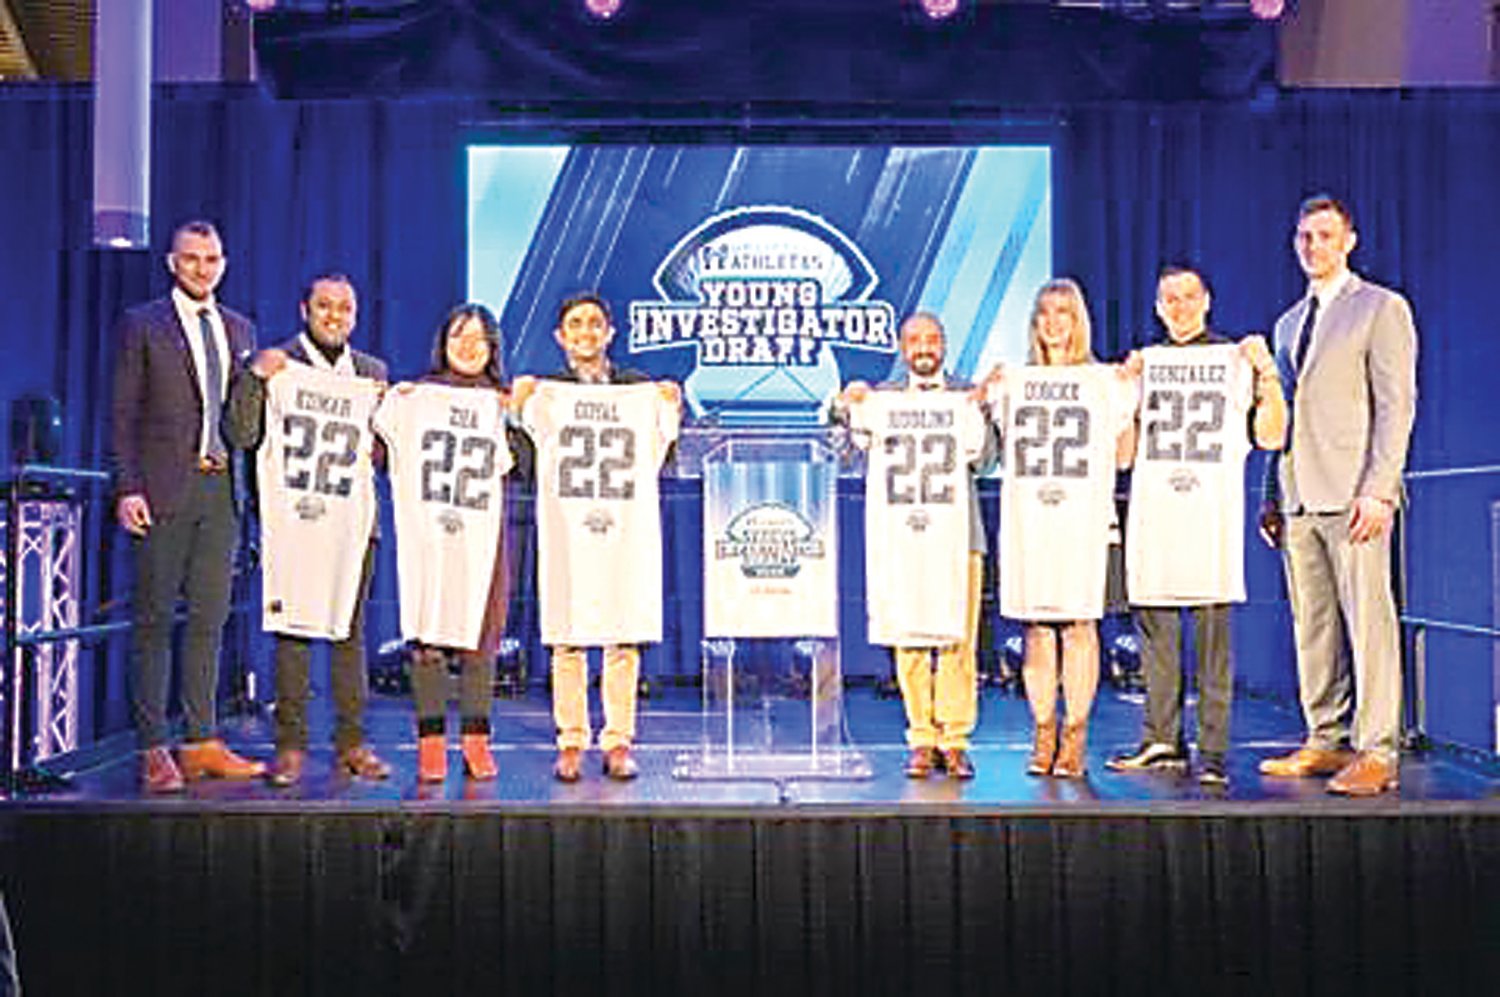 Brett Brackett, right, Uplifting Athletes general manager, and Robert Long, left, executive director, stand with grant recipients at the 2022 Young Investigator Draft.